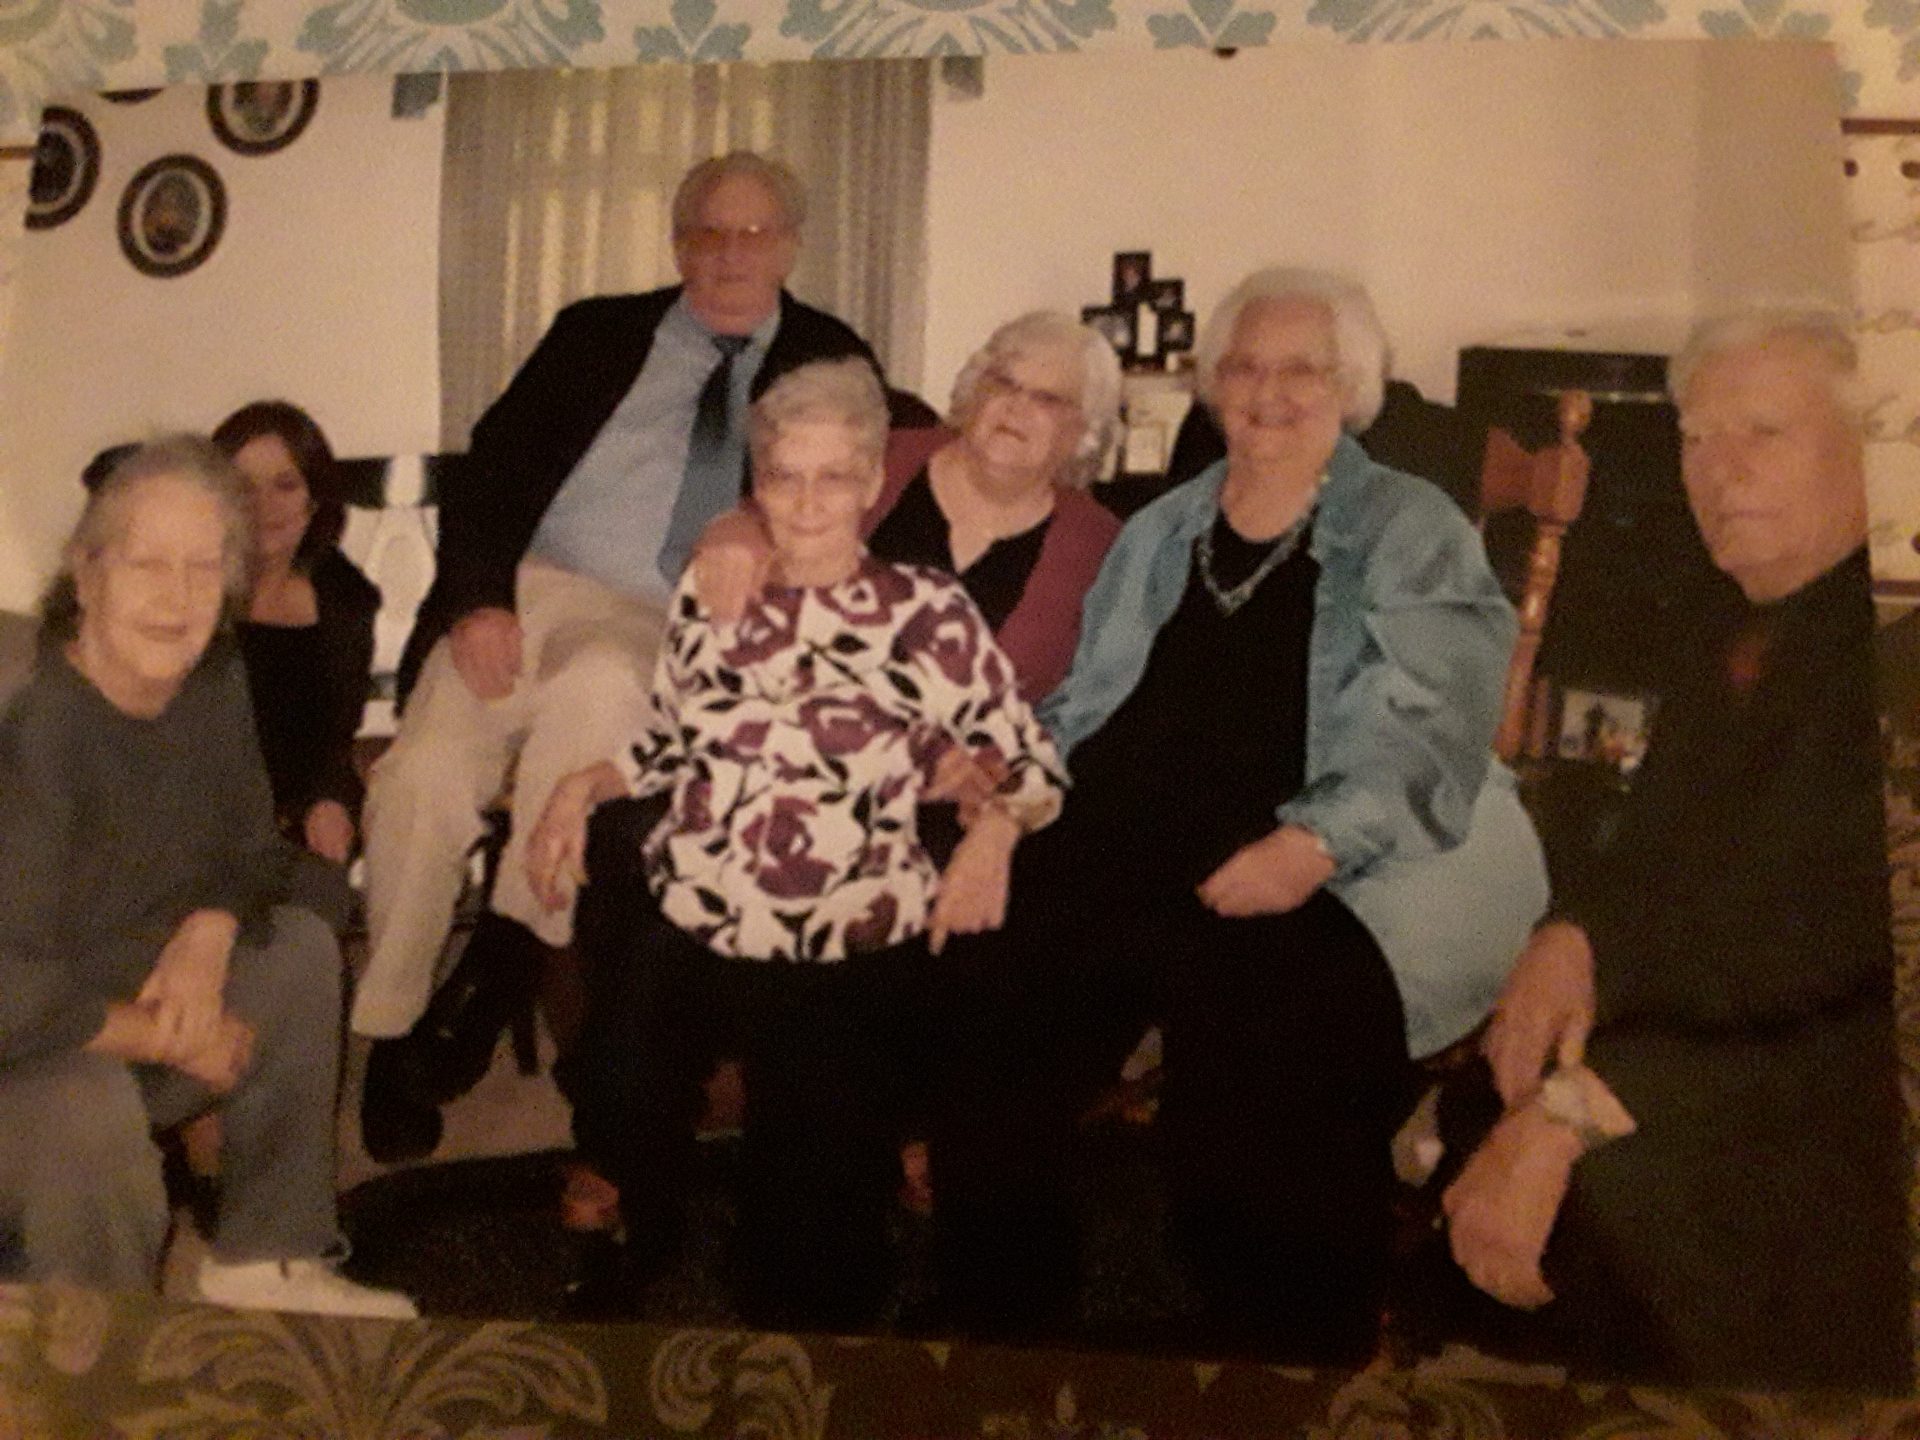 2010 at after gathering for uncle Bill's Memorial.   Possibly last pic of all sibs together.